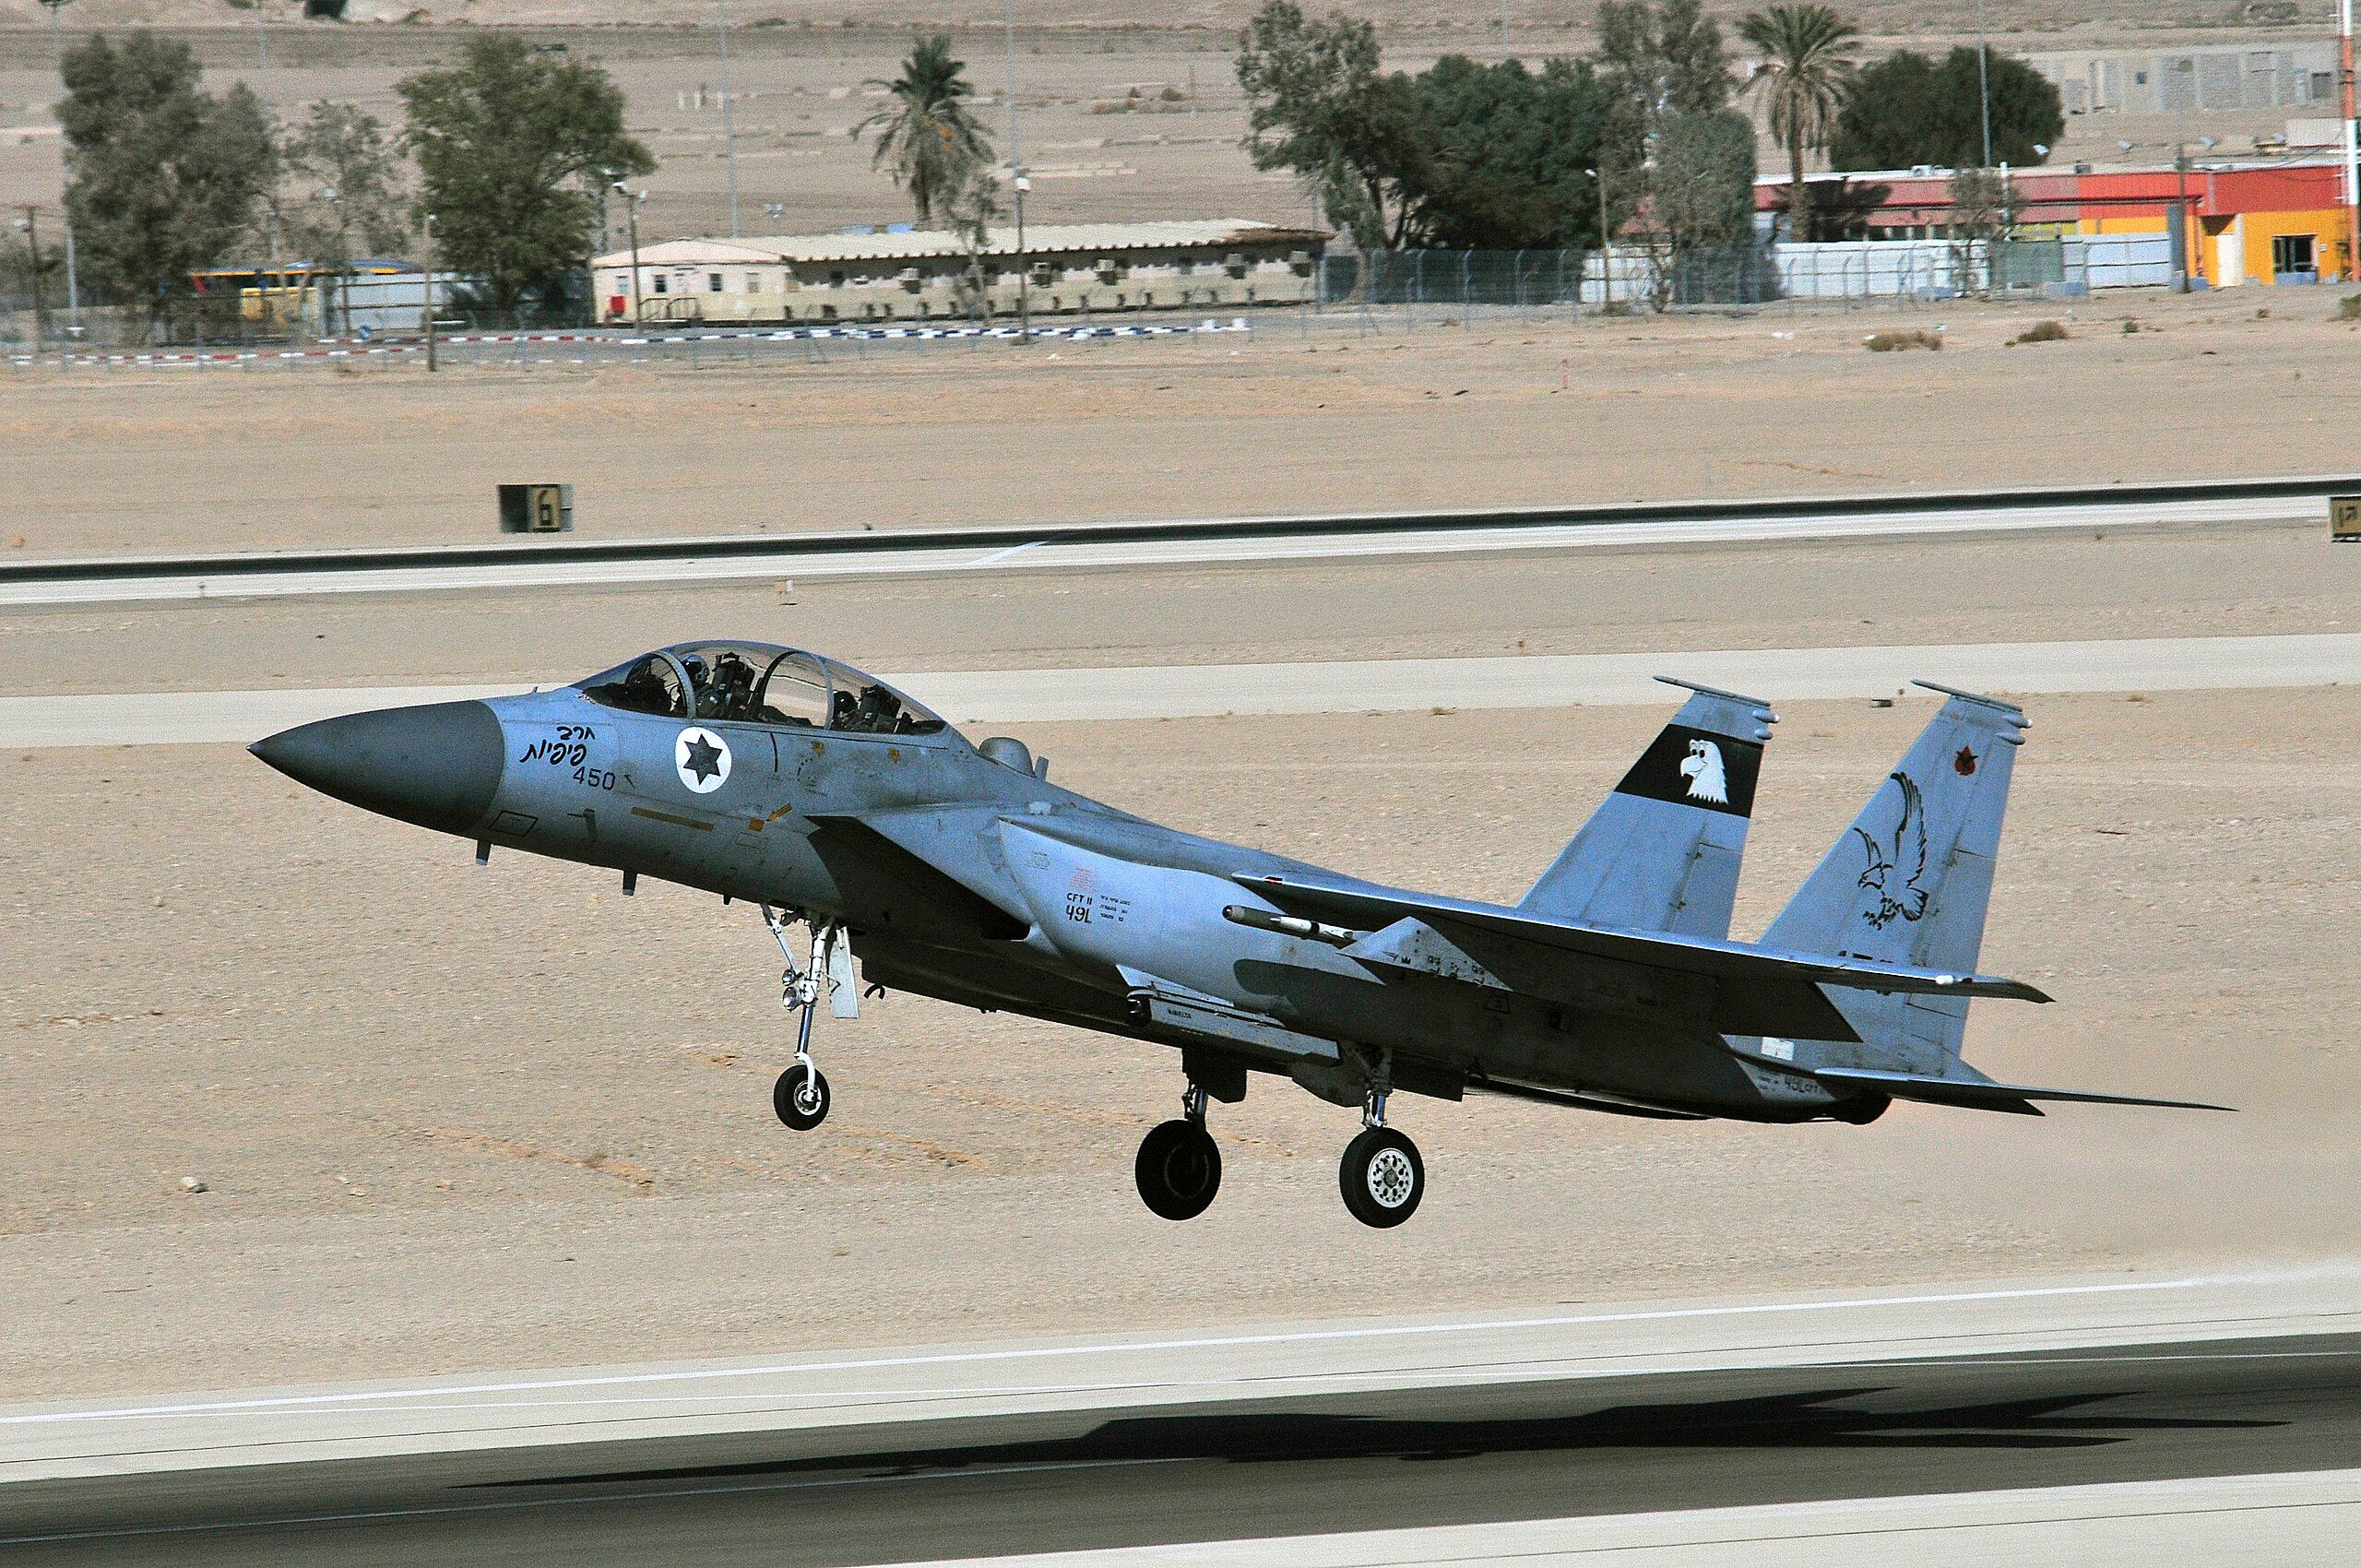 An Israeli Air Force F-15I takes off during the Blue Flag exercise on Uvda Air Force Base, Israel Nov. 26, 2013.   Blue Flag was a multinational aerial warfare exercise hosted by Israel, which promoted improved operational capability, combat effectiveness, understanding and cooperation between the U.S., Israel, Greece, and Italy.  The exercise was conducted from Nov. 24-28 and further strengthened the long-lasting relationship between the partner nations, while ensuring regional peace and stability. (Official U.S. Air Force photo by Master Sgt. Lee Osberry/Released)